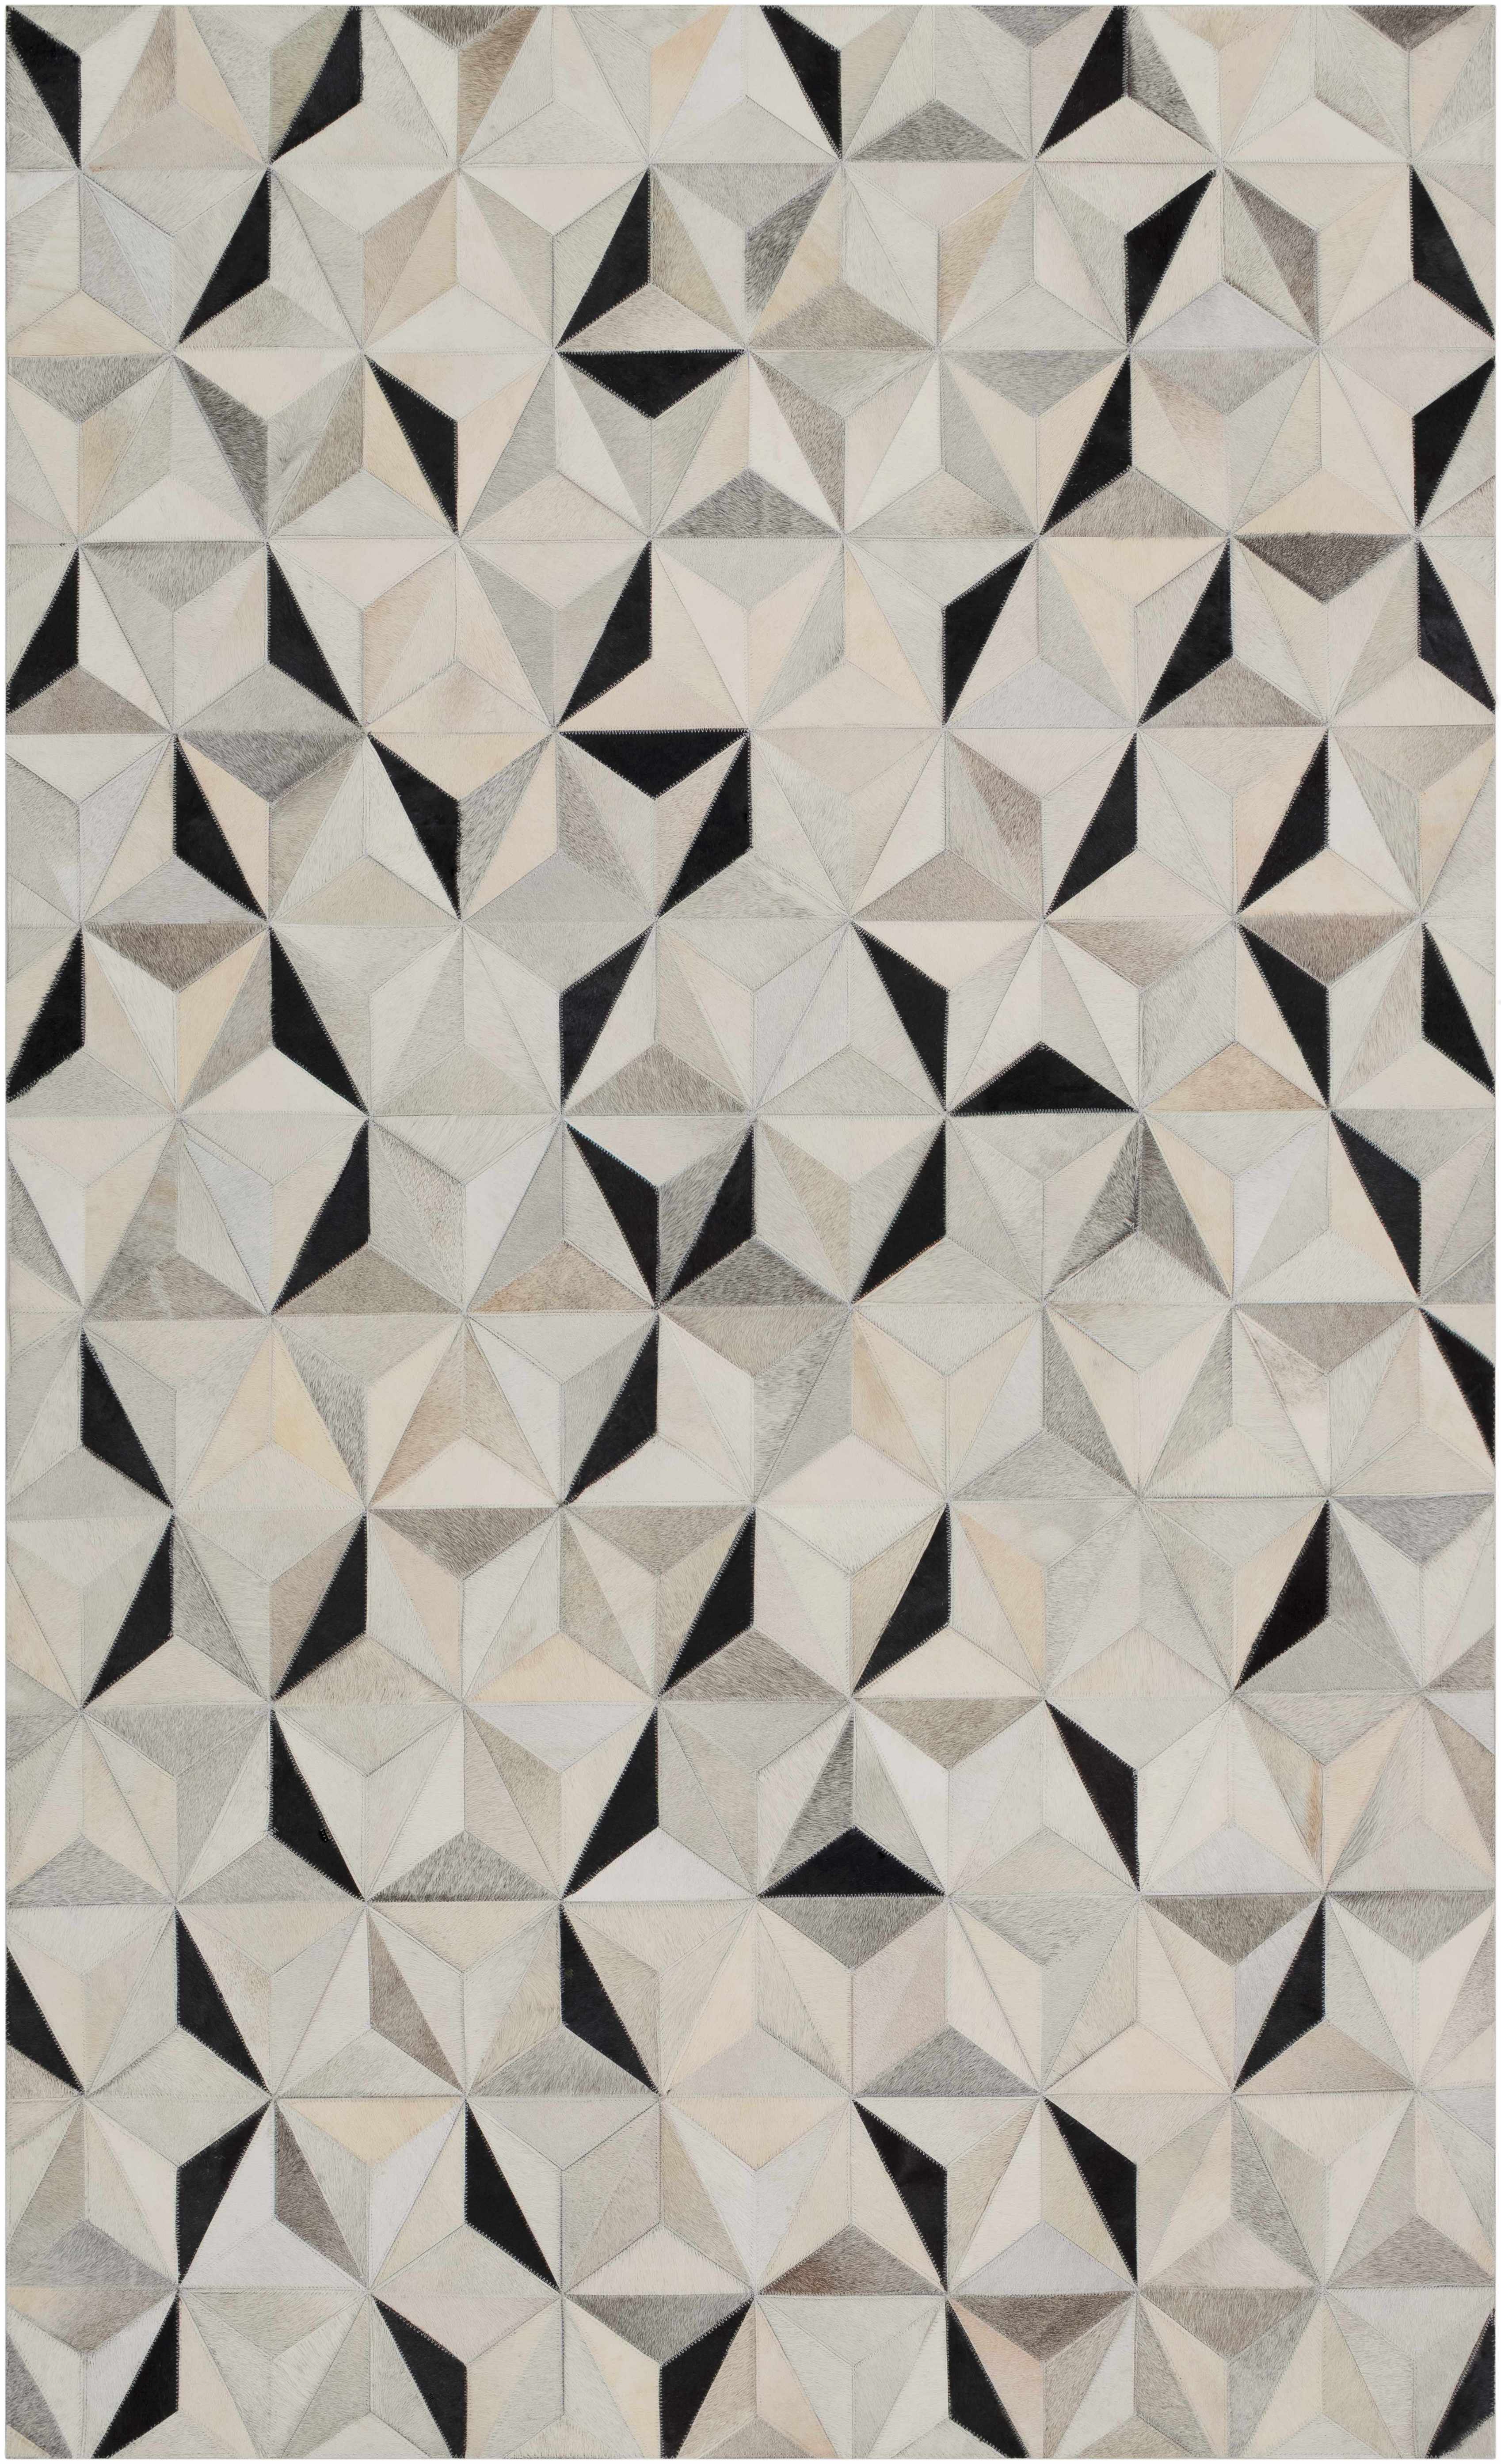 Veyo 5' x 8' Hides and Leather Cowhide Leather Area Rug - Hauteloom